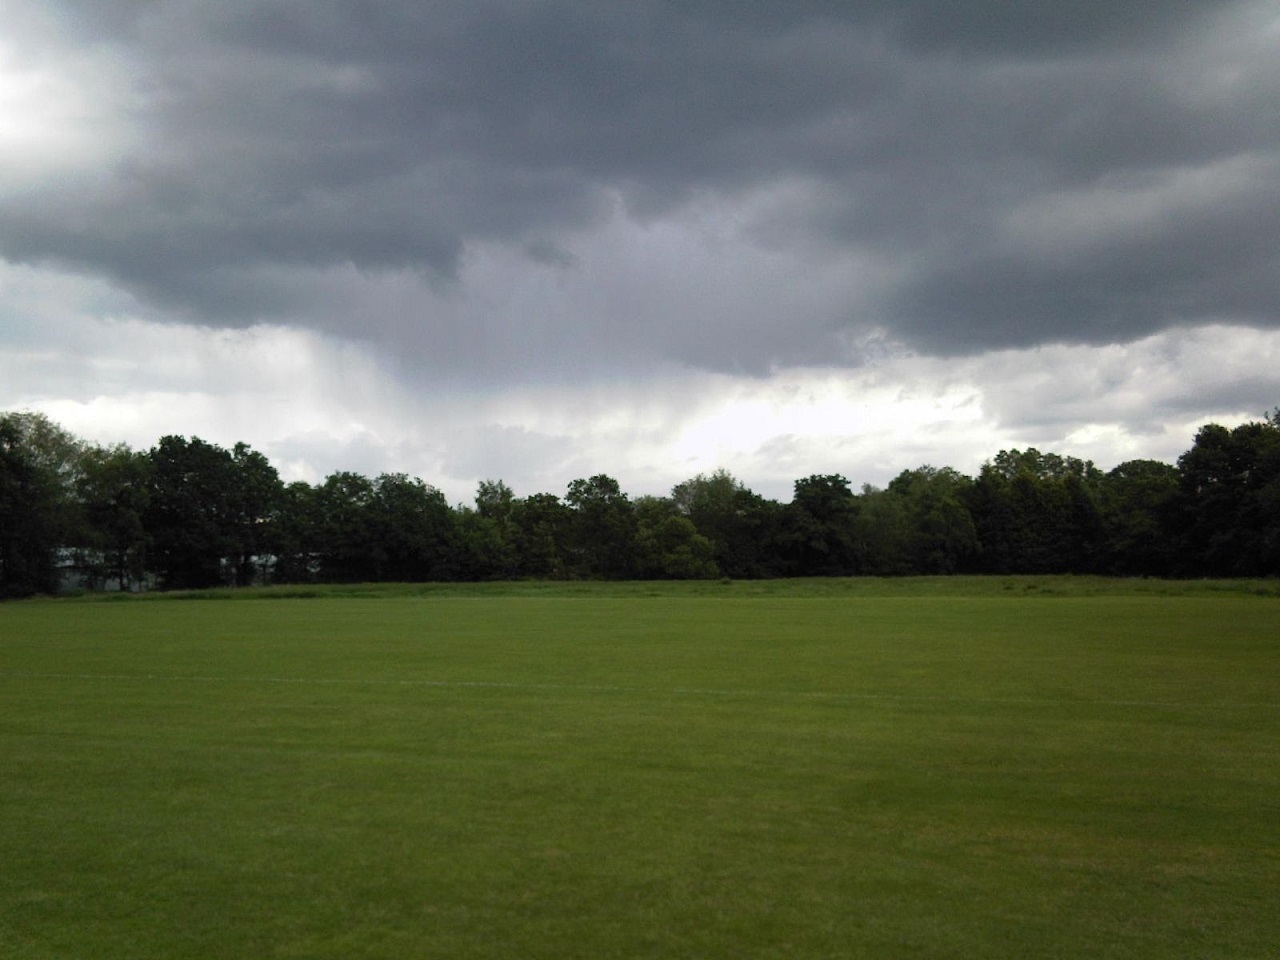 A green playing field lies under a dark grey sky with distant rain falling. The far side of the field is bordered by trees.